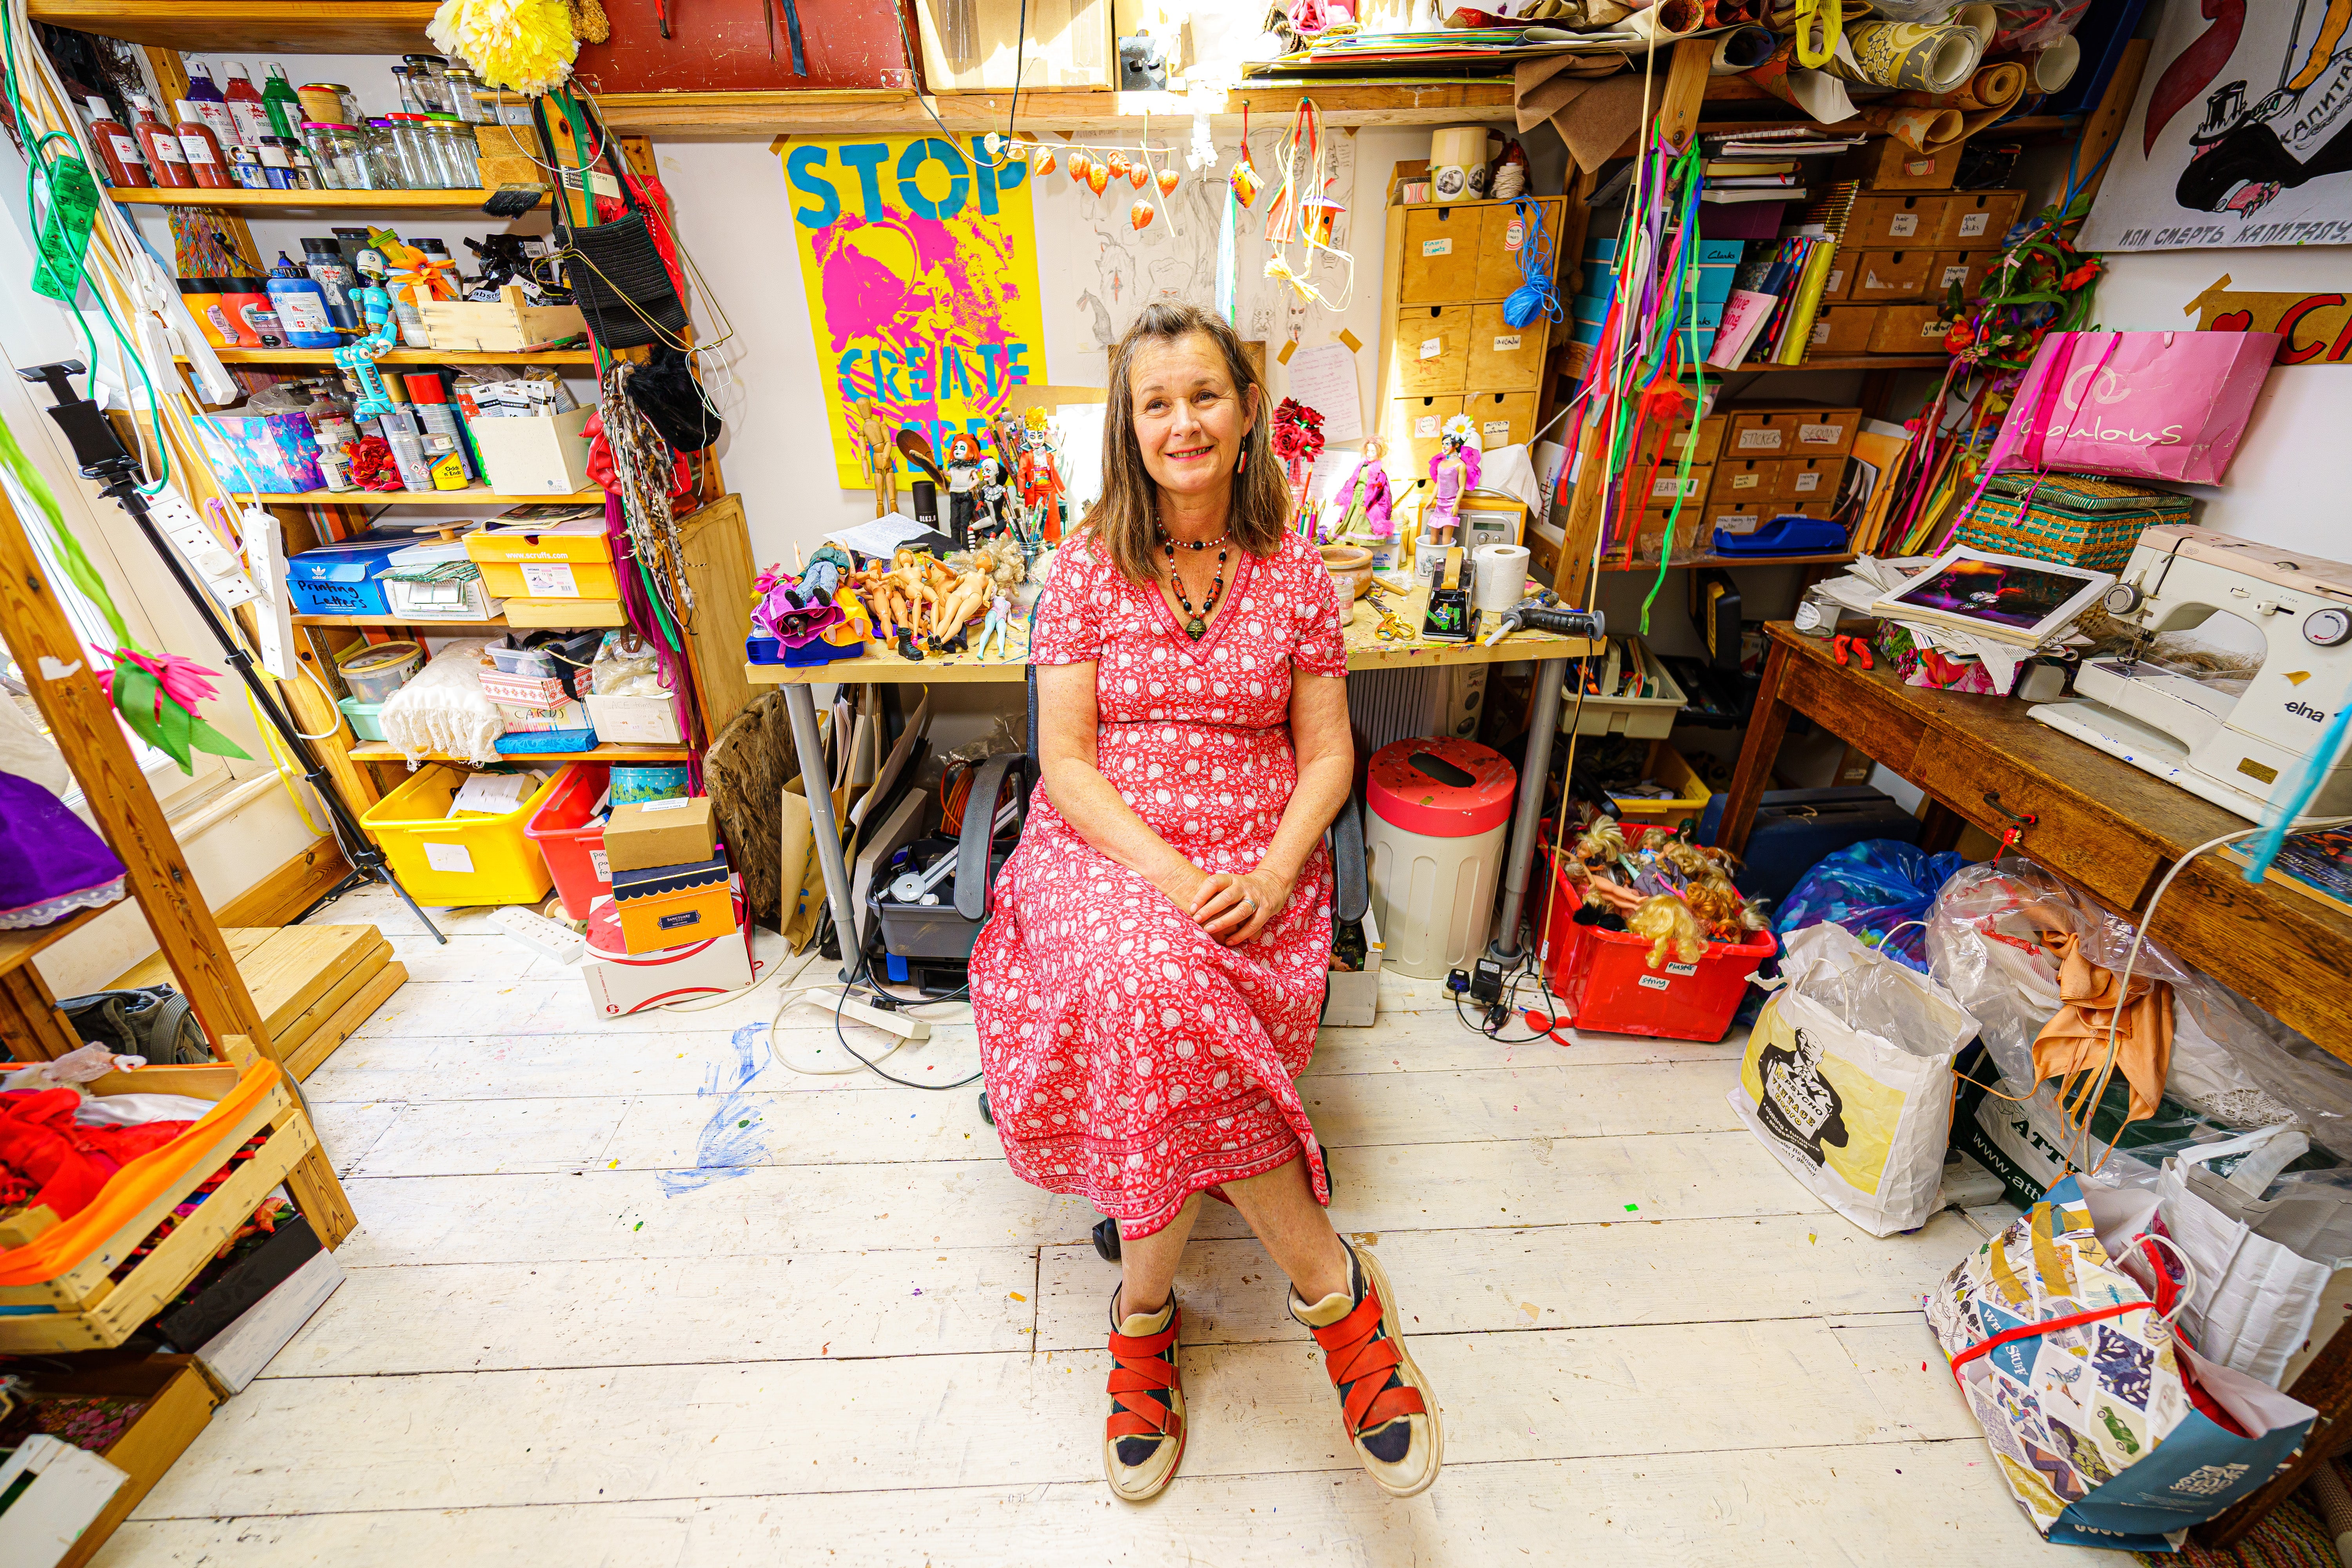 Artist Lou Gray, 61, at her home studio in Bristol, where she creates characters made from old dolls including Barbie, Ken and Action Man, plus other assorted miniature doll figures (Ben Birchall/PA Wire/PA Real Life)